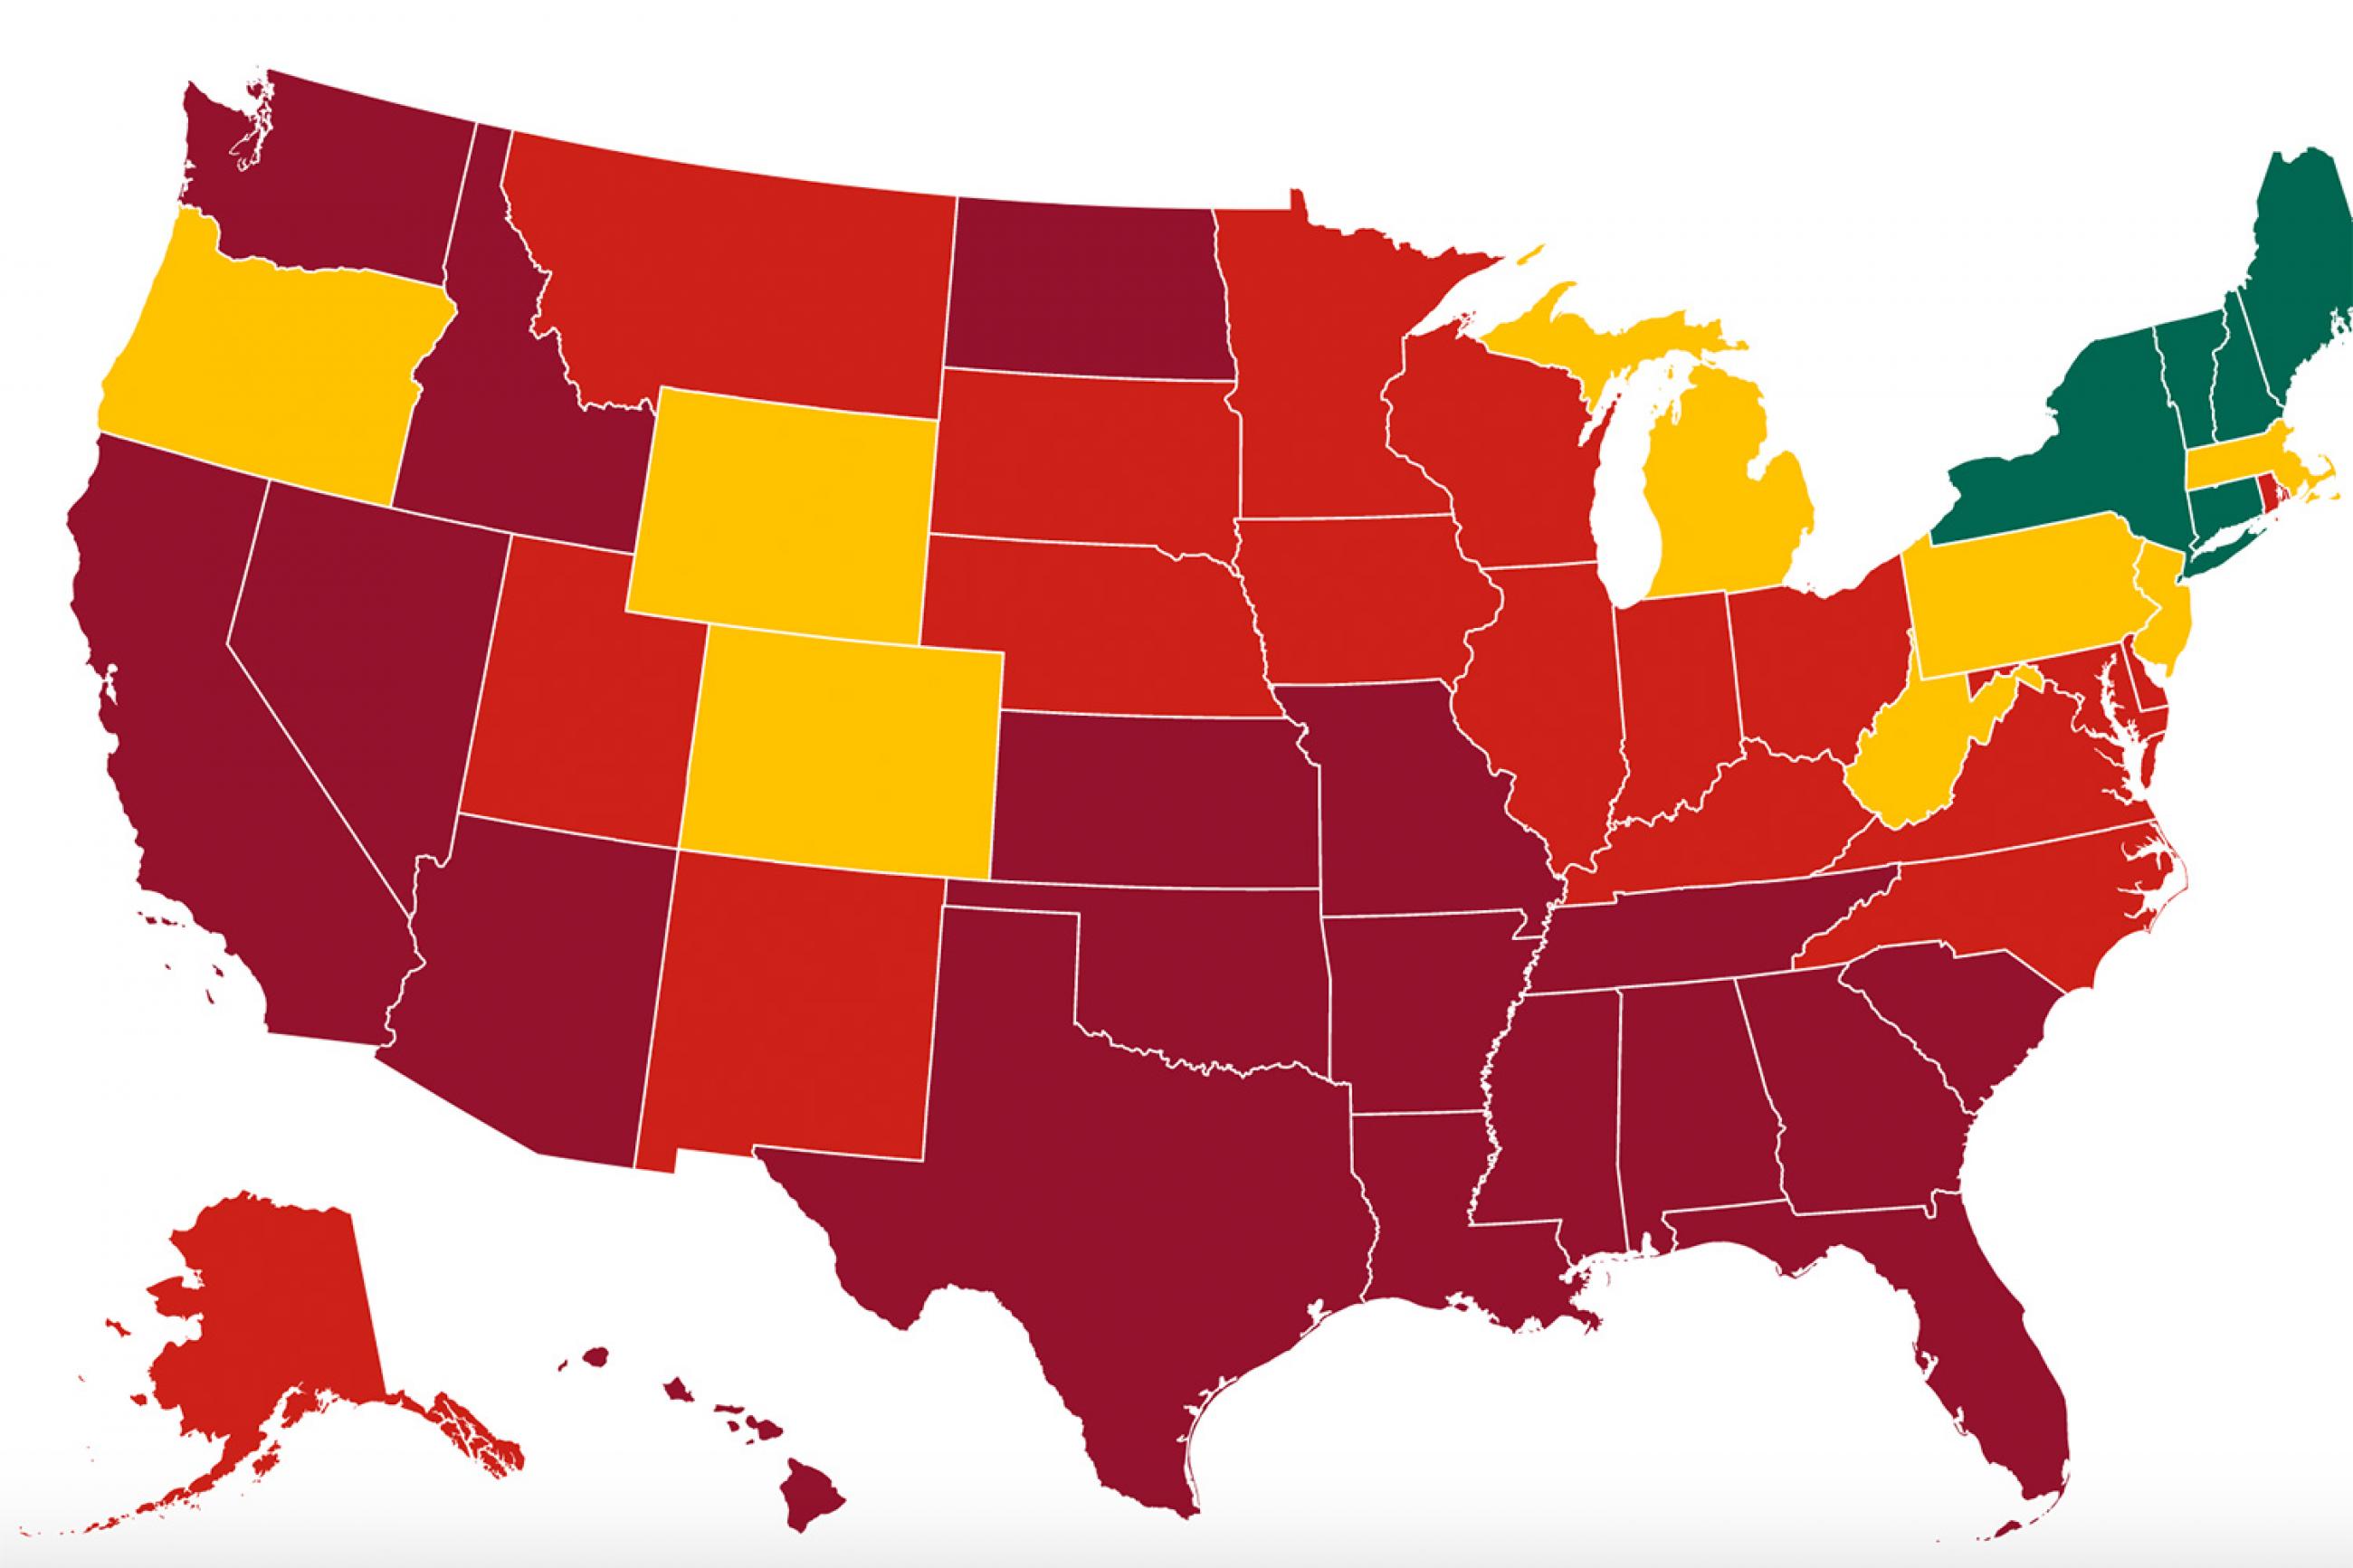 Each state's progress towards reduction in symptoms and cases, health system readiness, and increased testing. The image shows a map of the united states with four colors according to outbreak status. SOURCE: Covid Exit Strategy